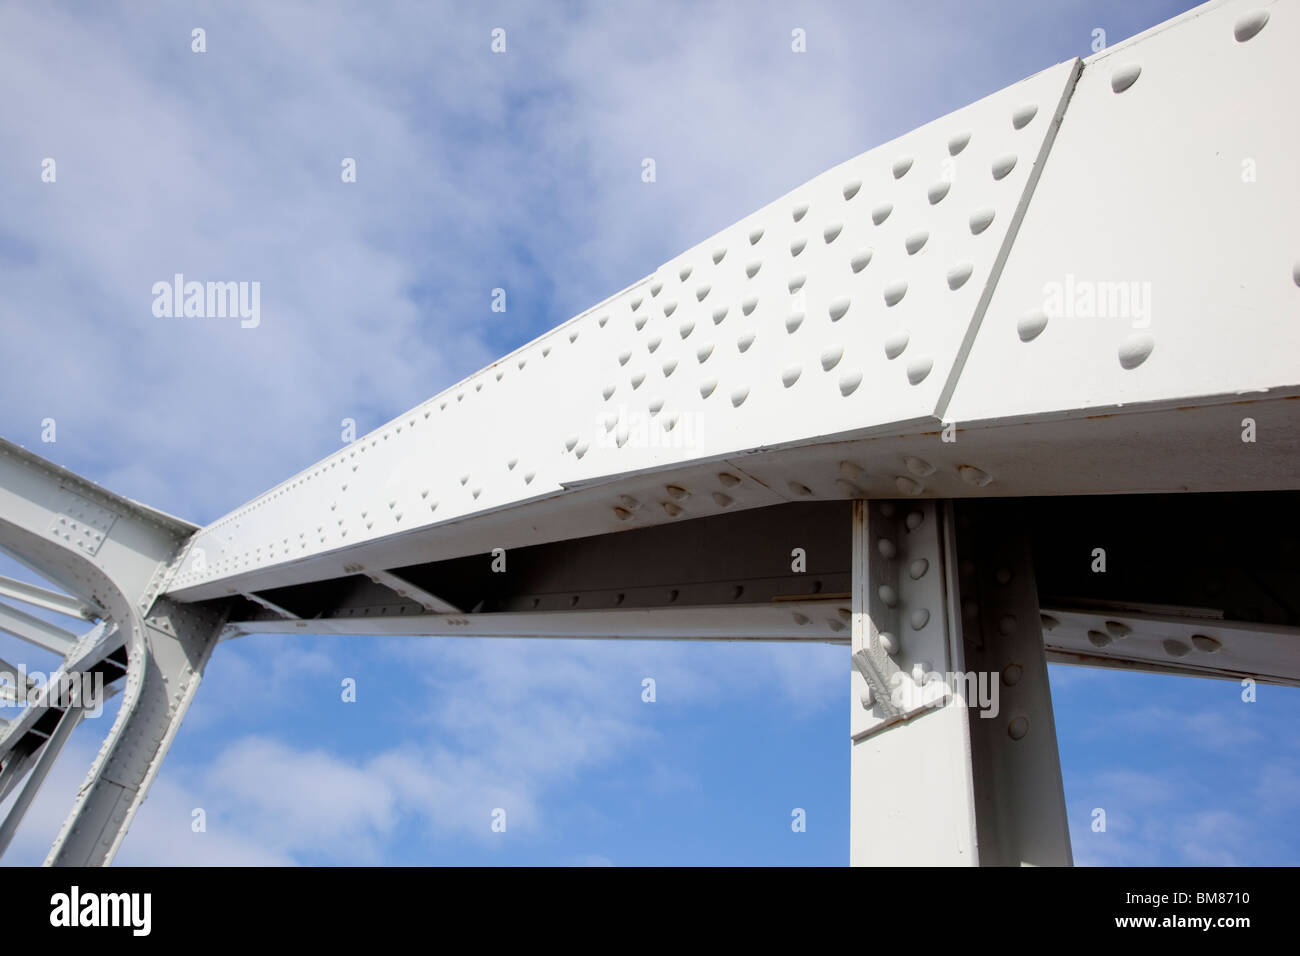 Riveted steel beam and joint at a steel bridge support structure Stock Photo